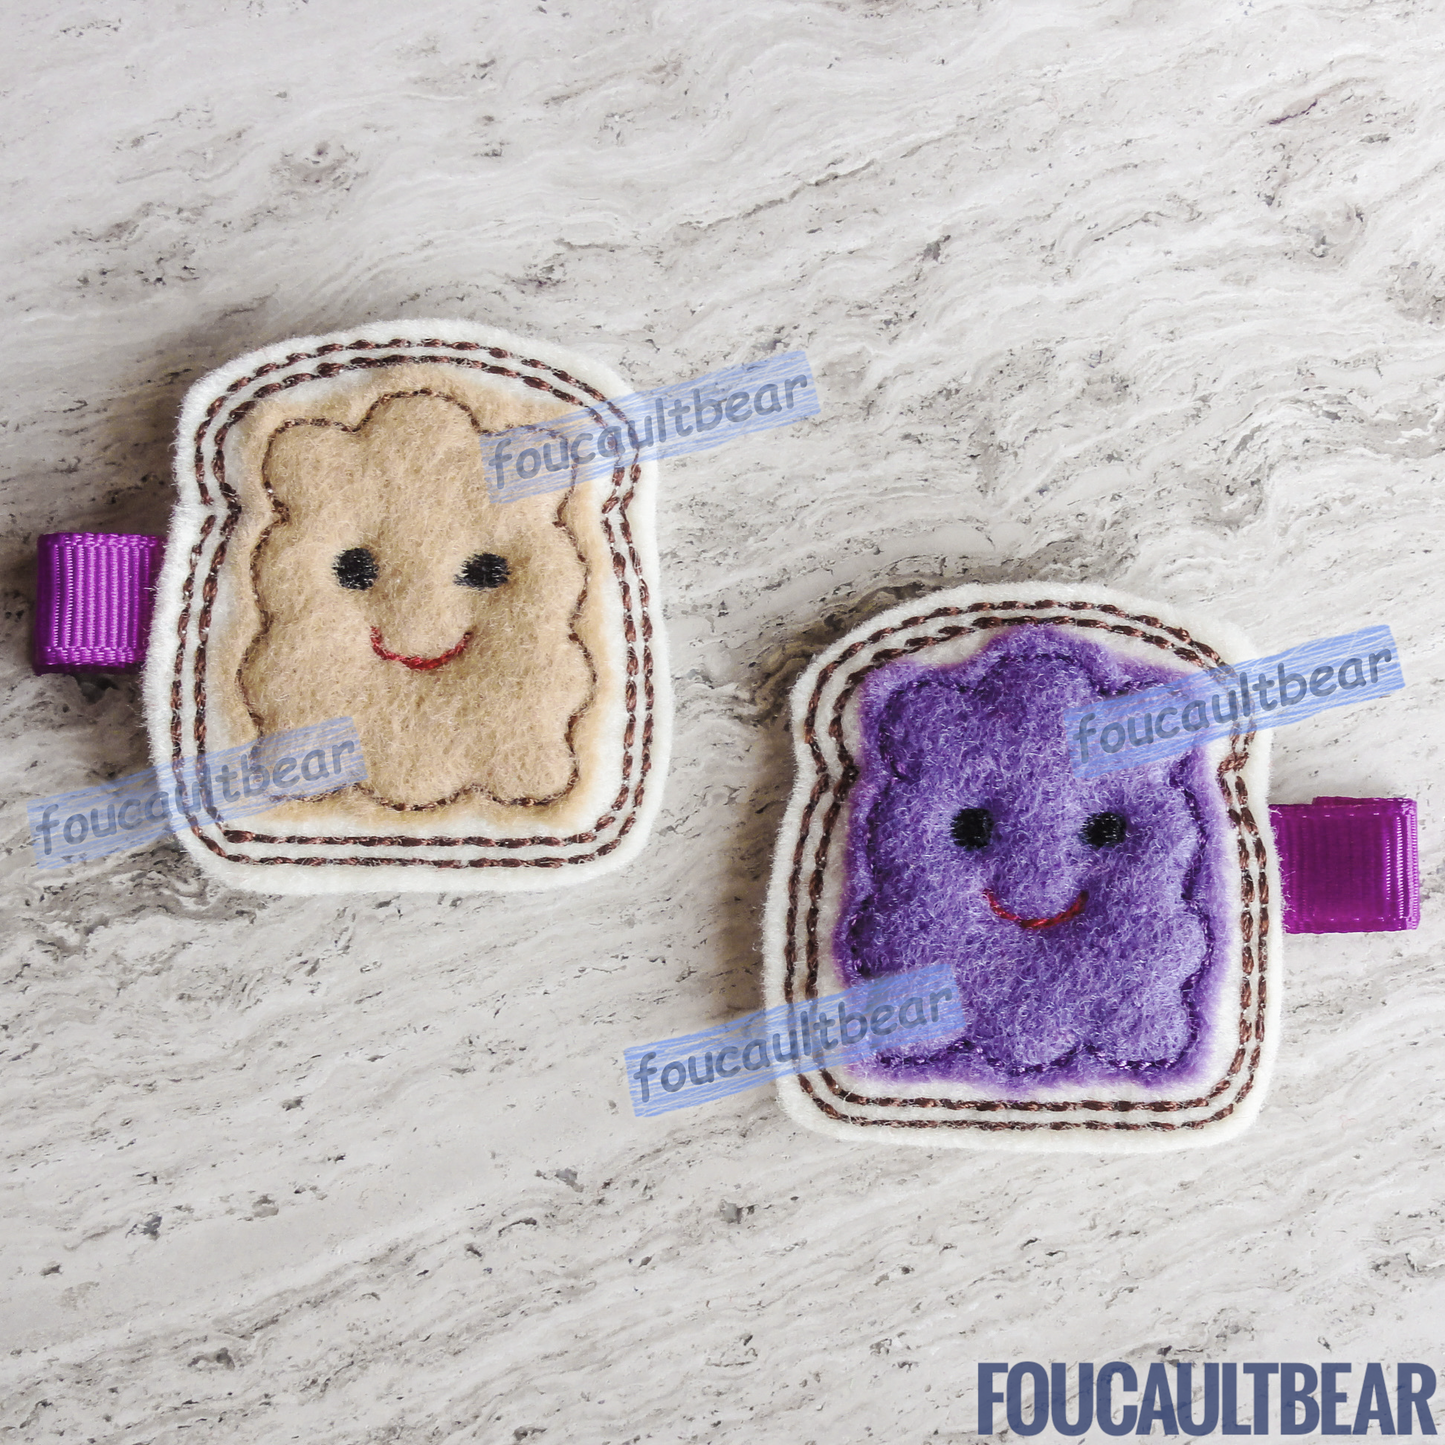 Foucaultbear's HANDMADE HAIR CLIPPIES. Set of Peanut Butter & Jelly (Grape). Embroidered Soft Felt Centerpieces. Partially Lined Alligator Hair Clips. This darling PB&J Hair Clip Set is perfect for toddlers, preschoolers, kindergartners, grade-schoolers or babies with enough hair to wear them, year-round. Very Versatile, in my opinion. Each bread measures in at approximately 1 3/4 inches (4.5 cm) in height. Attached with 1 3/4 inch (4.5 cm) partially lined alligator clips. 